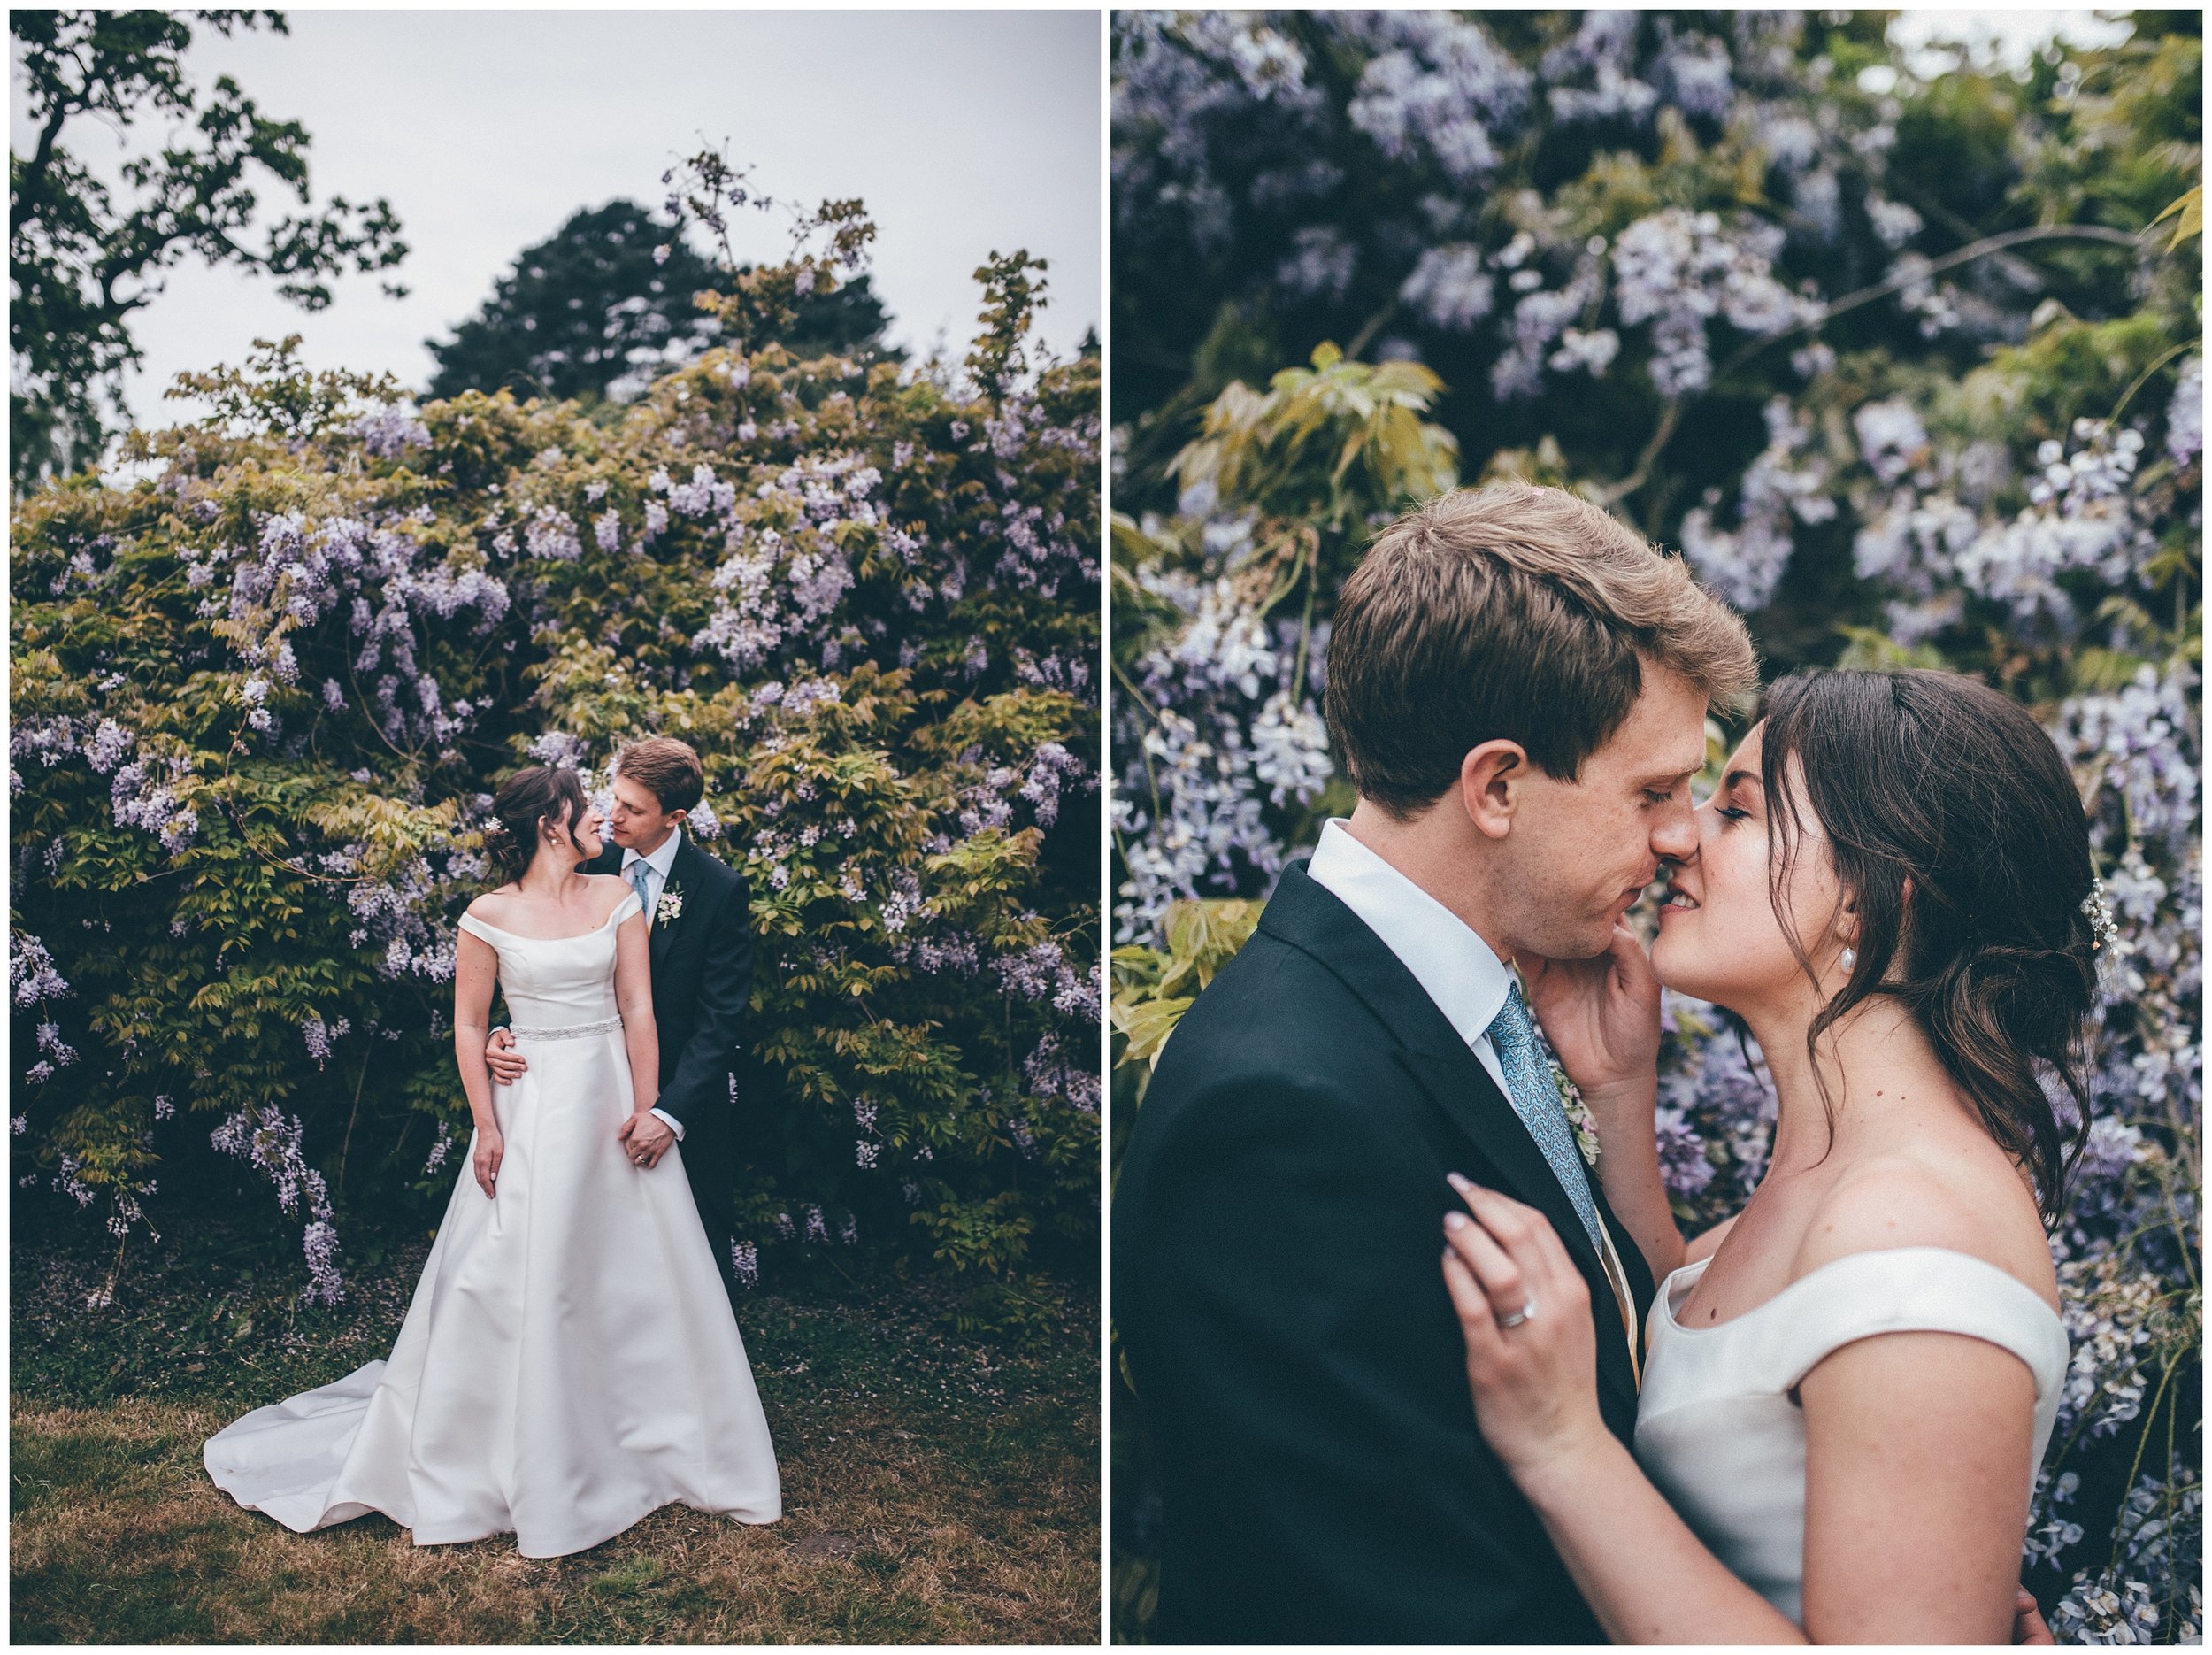 Bride and groom in front of beautiful flowers on their wedding day at Henham Park.